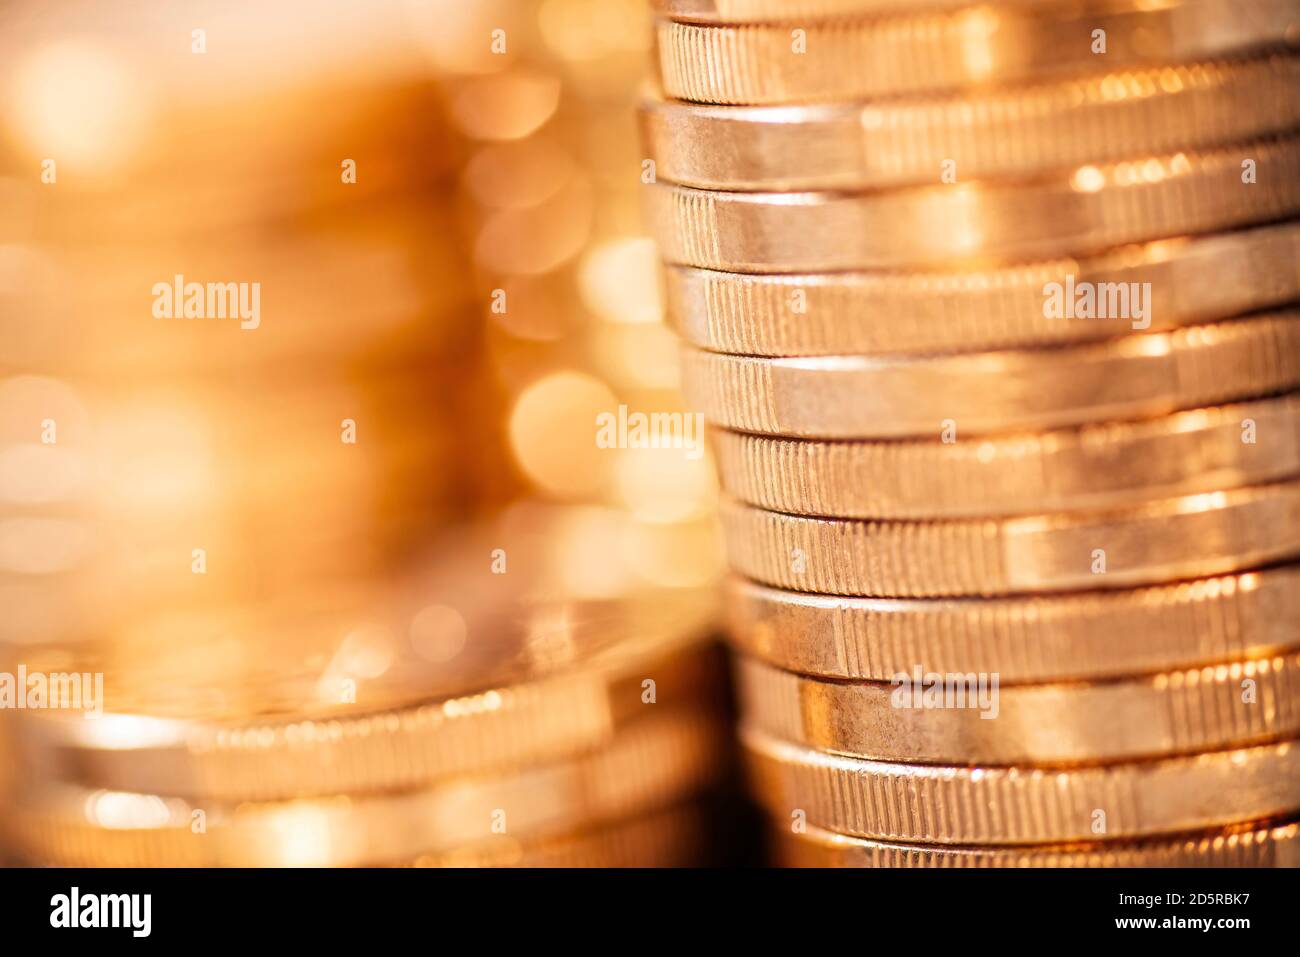 Detail of several stacks of coins Stock Photo